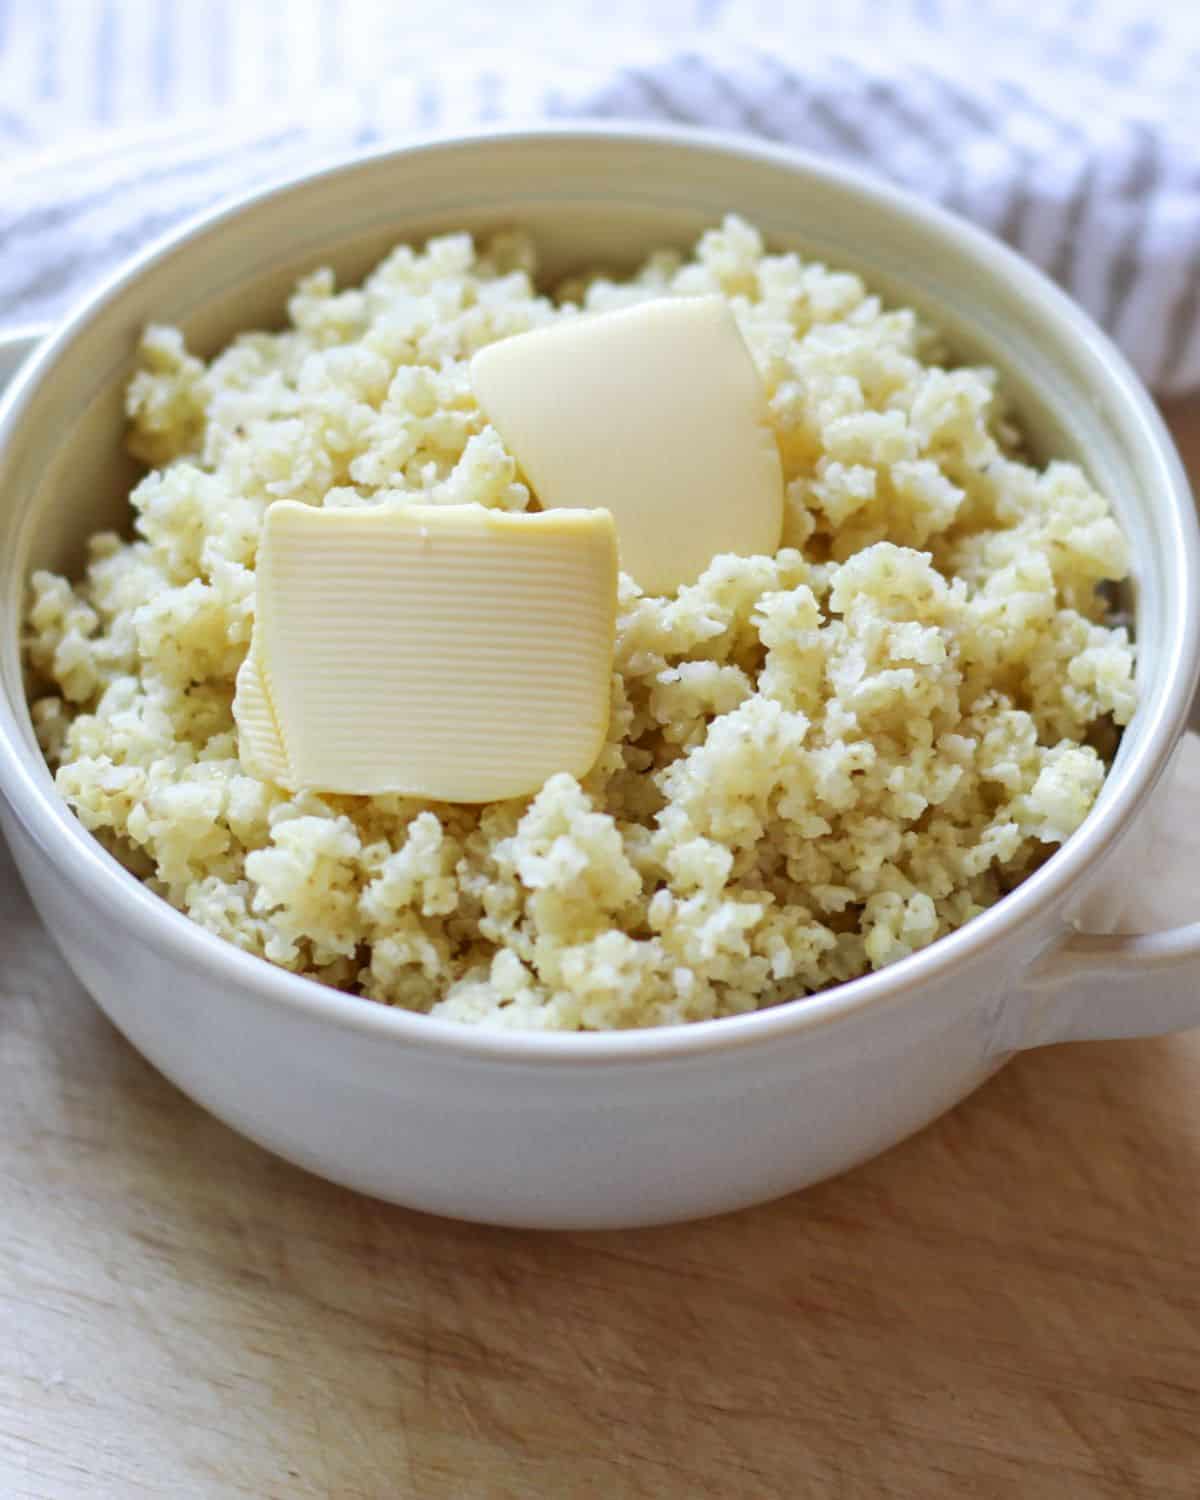 Cooked millet grain in a bowl with two side handles. There are two slices of butter on top.